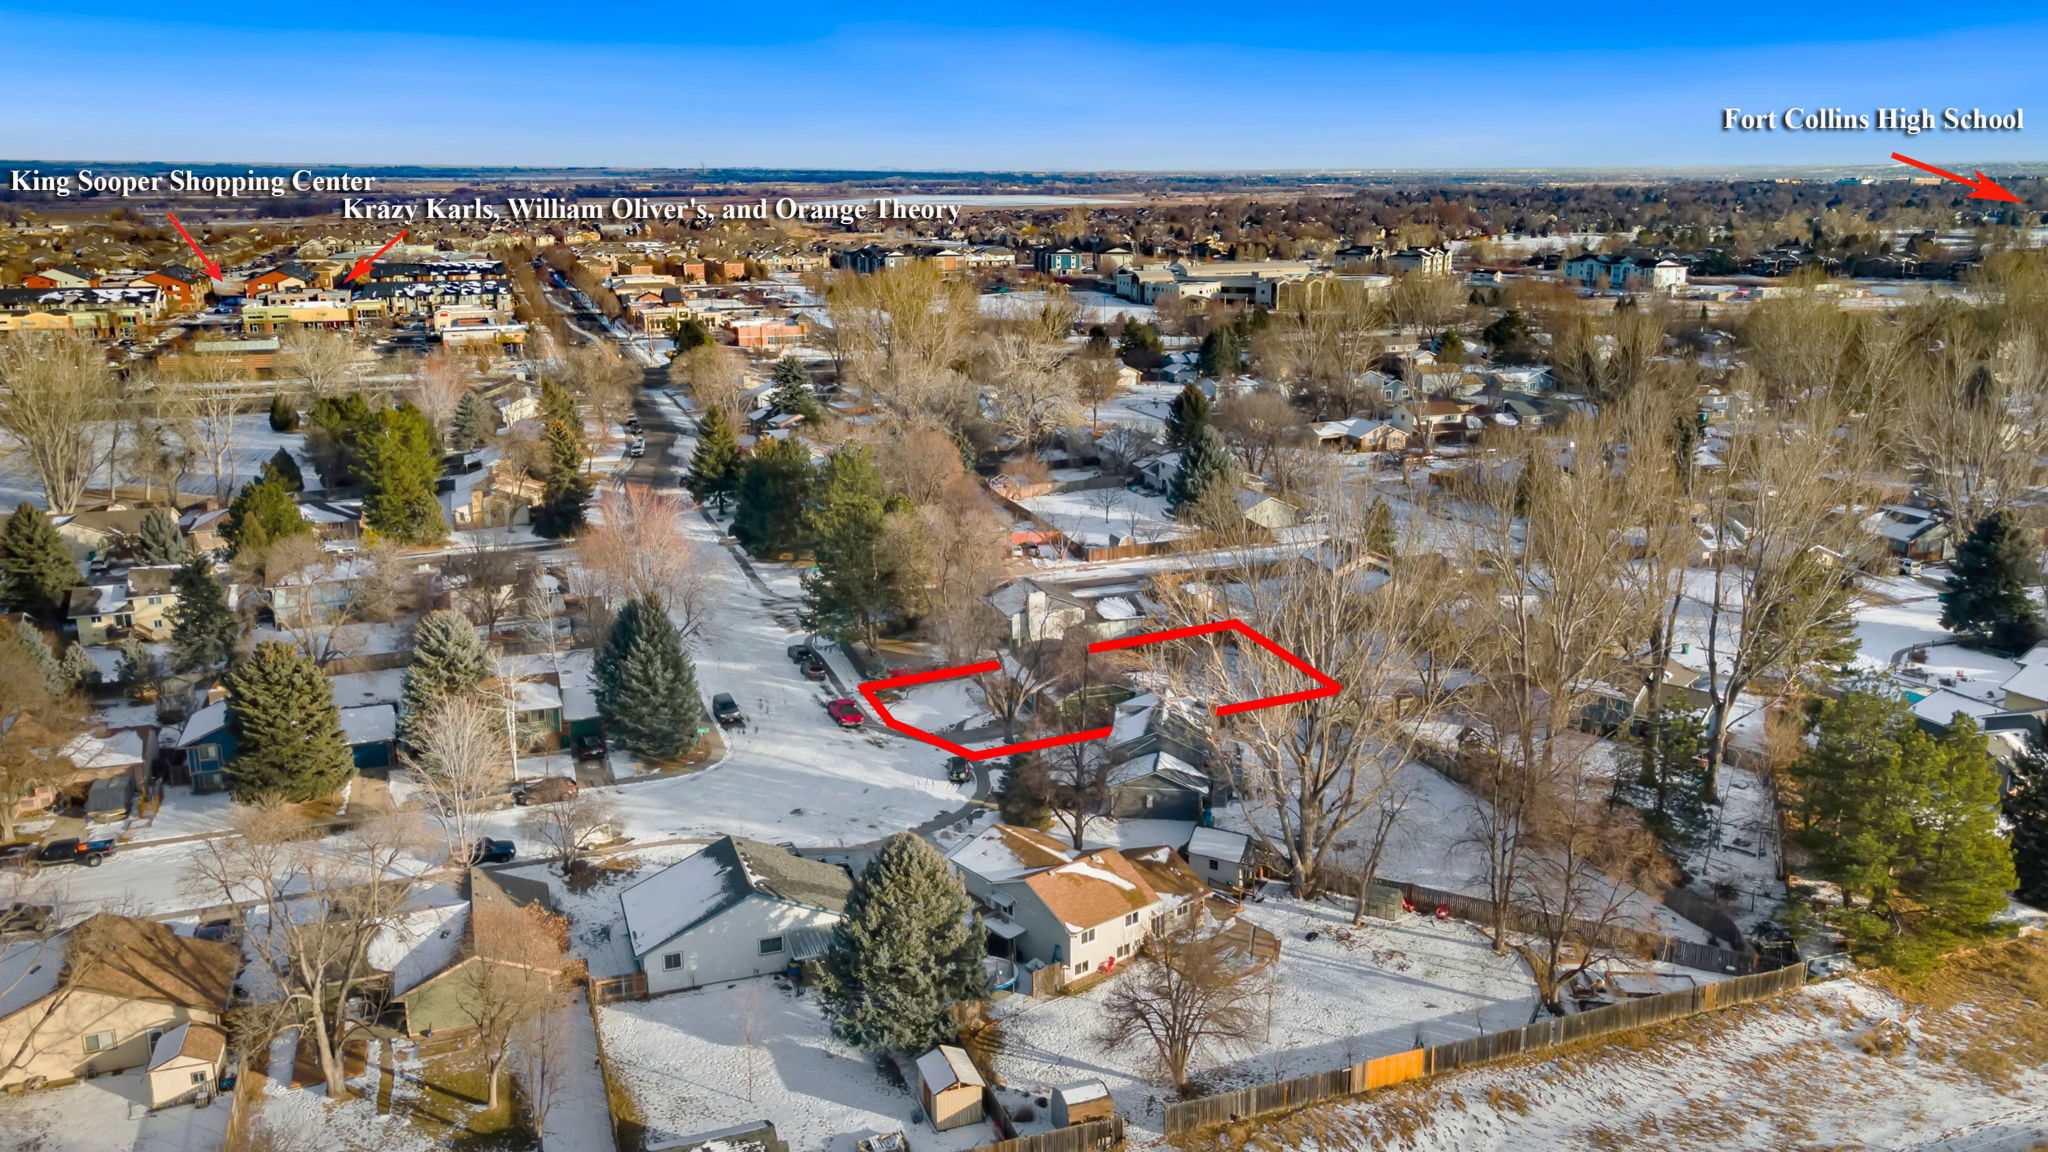 Excellent location near grocery stores, restaurants, bars, breweries, hiking and biking trails, k-12 schools, and quick access to I-25